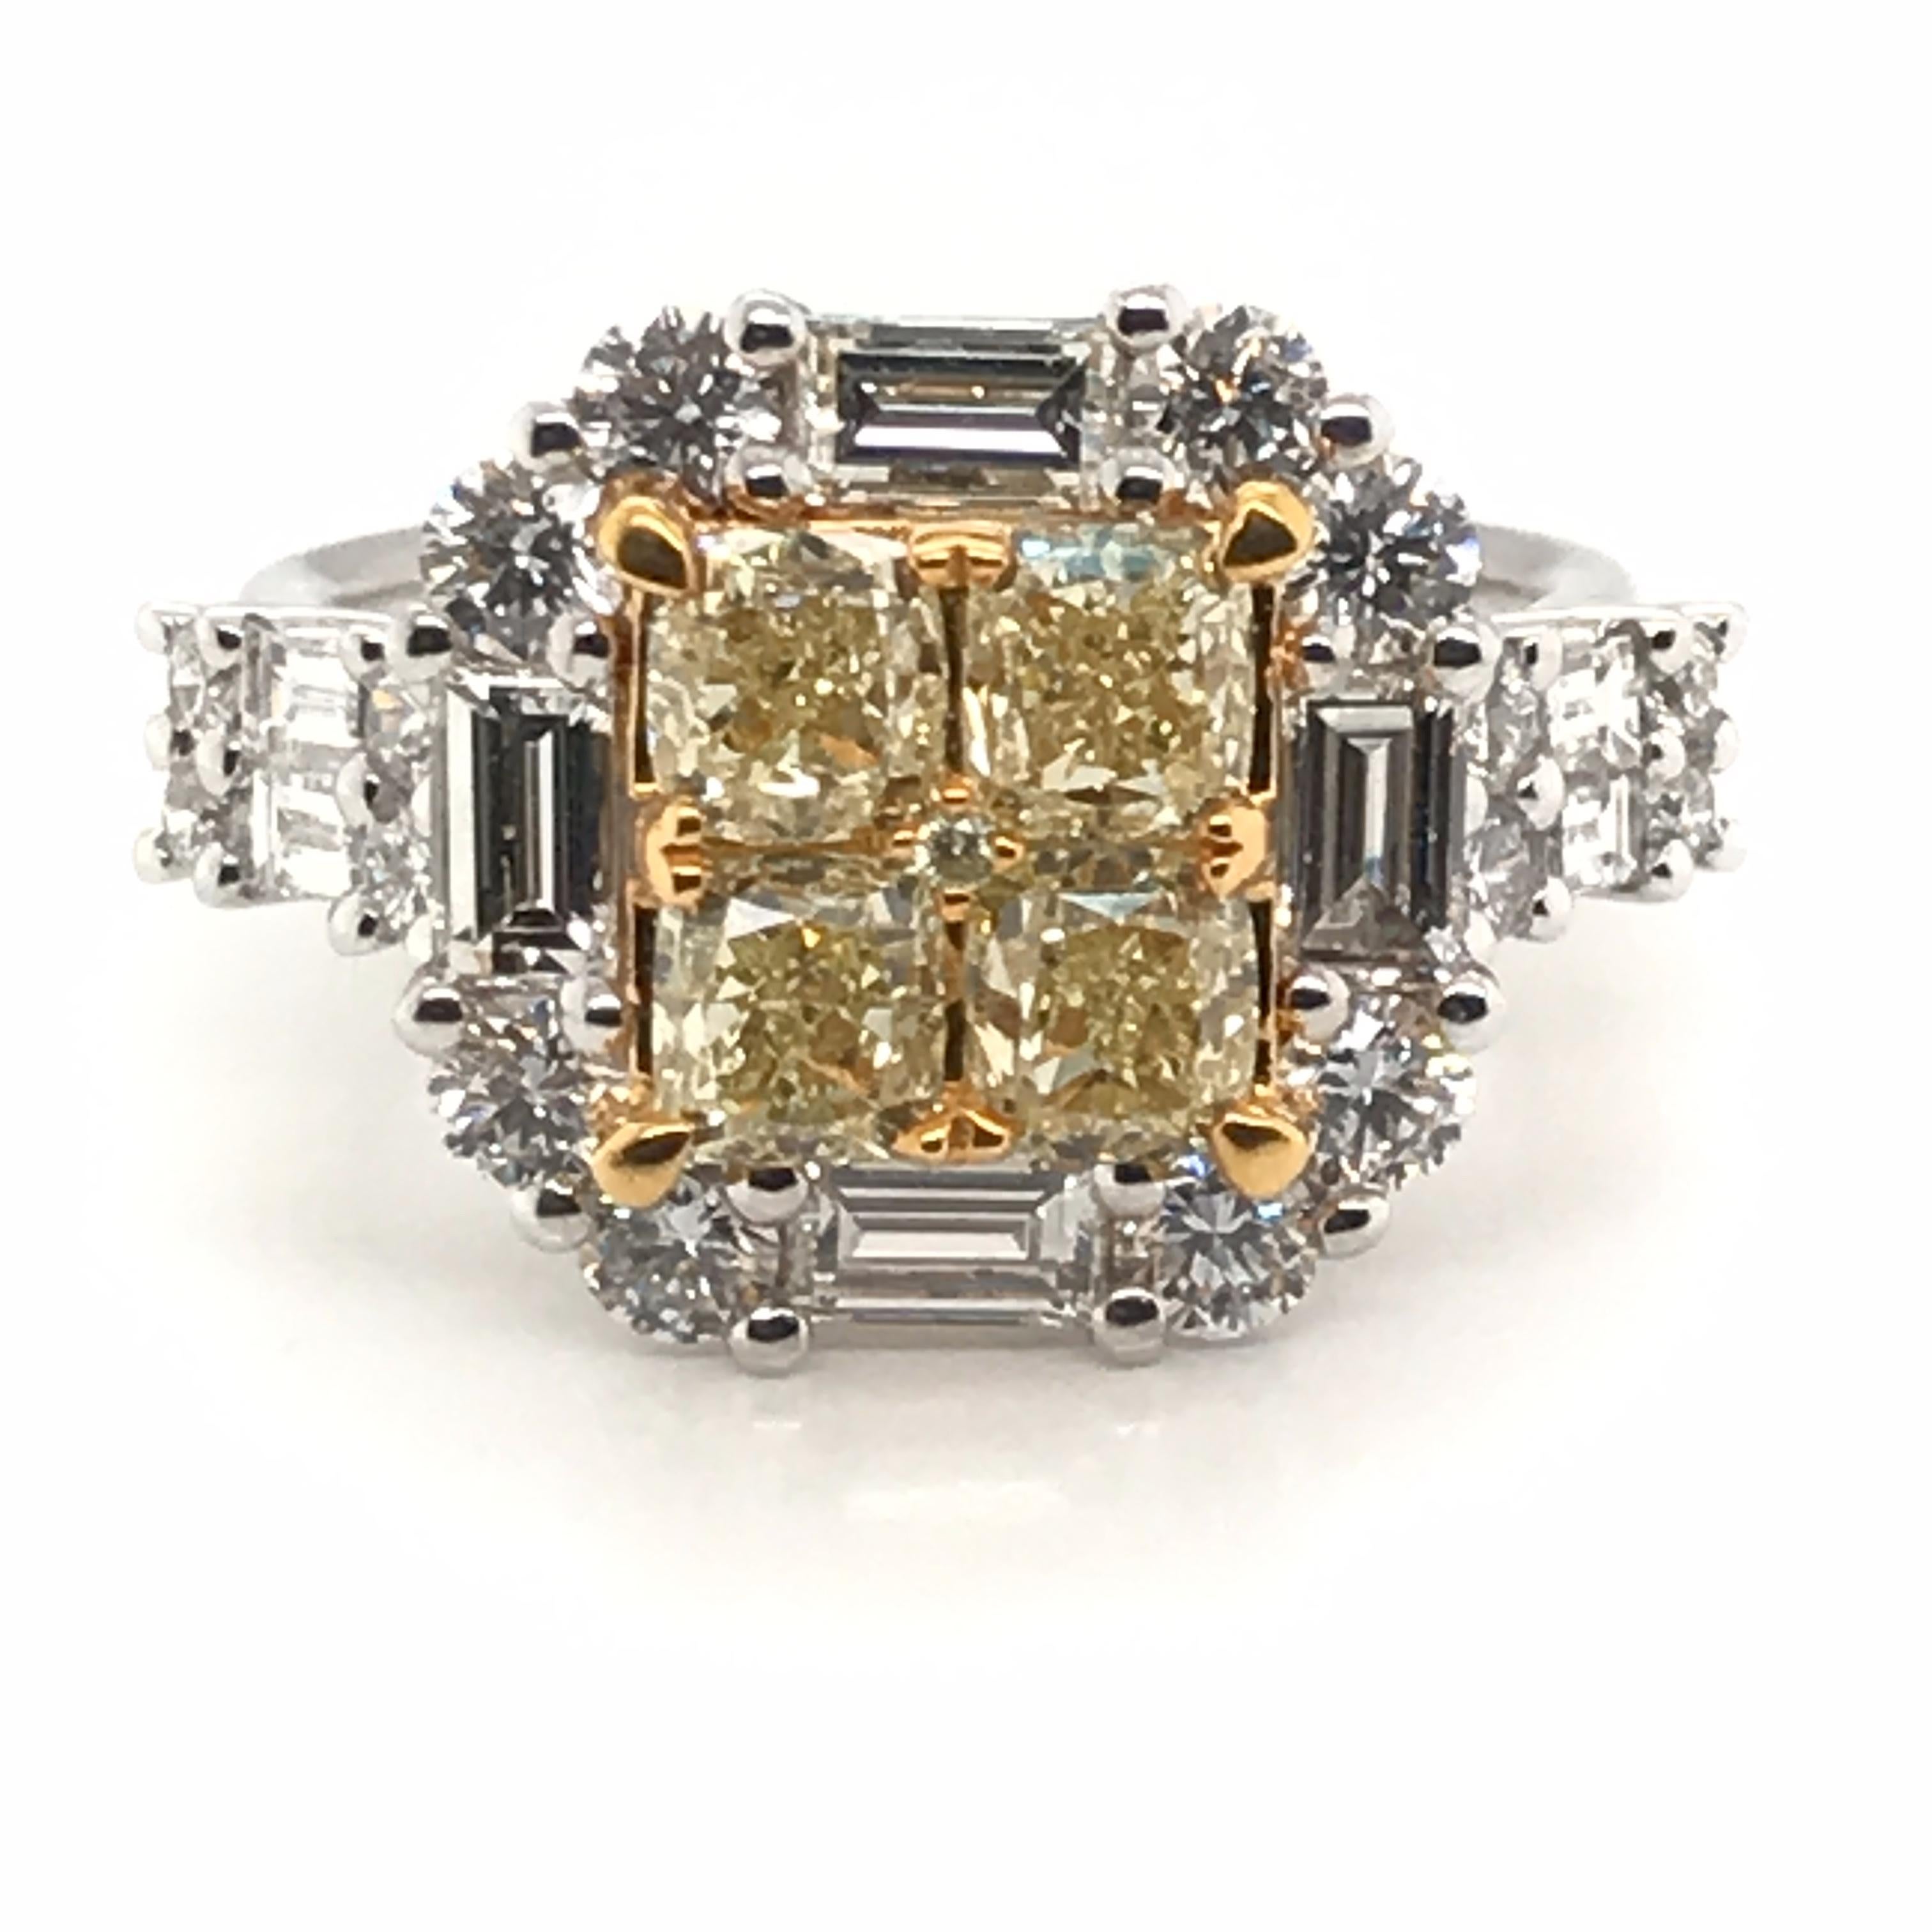 HJN Inc. Ring featuring a 3.44 Carat Natural Yellow Diamond Princess Cluster with Round Diamonds Ring.

Natural Yellow Diamond Weight: 1.73 Carats
Round-Cut Diamond Weight: 0.80 Carats
Baguette-Cut Diamond Weight: 0.91 Carats

Total Stones: